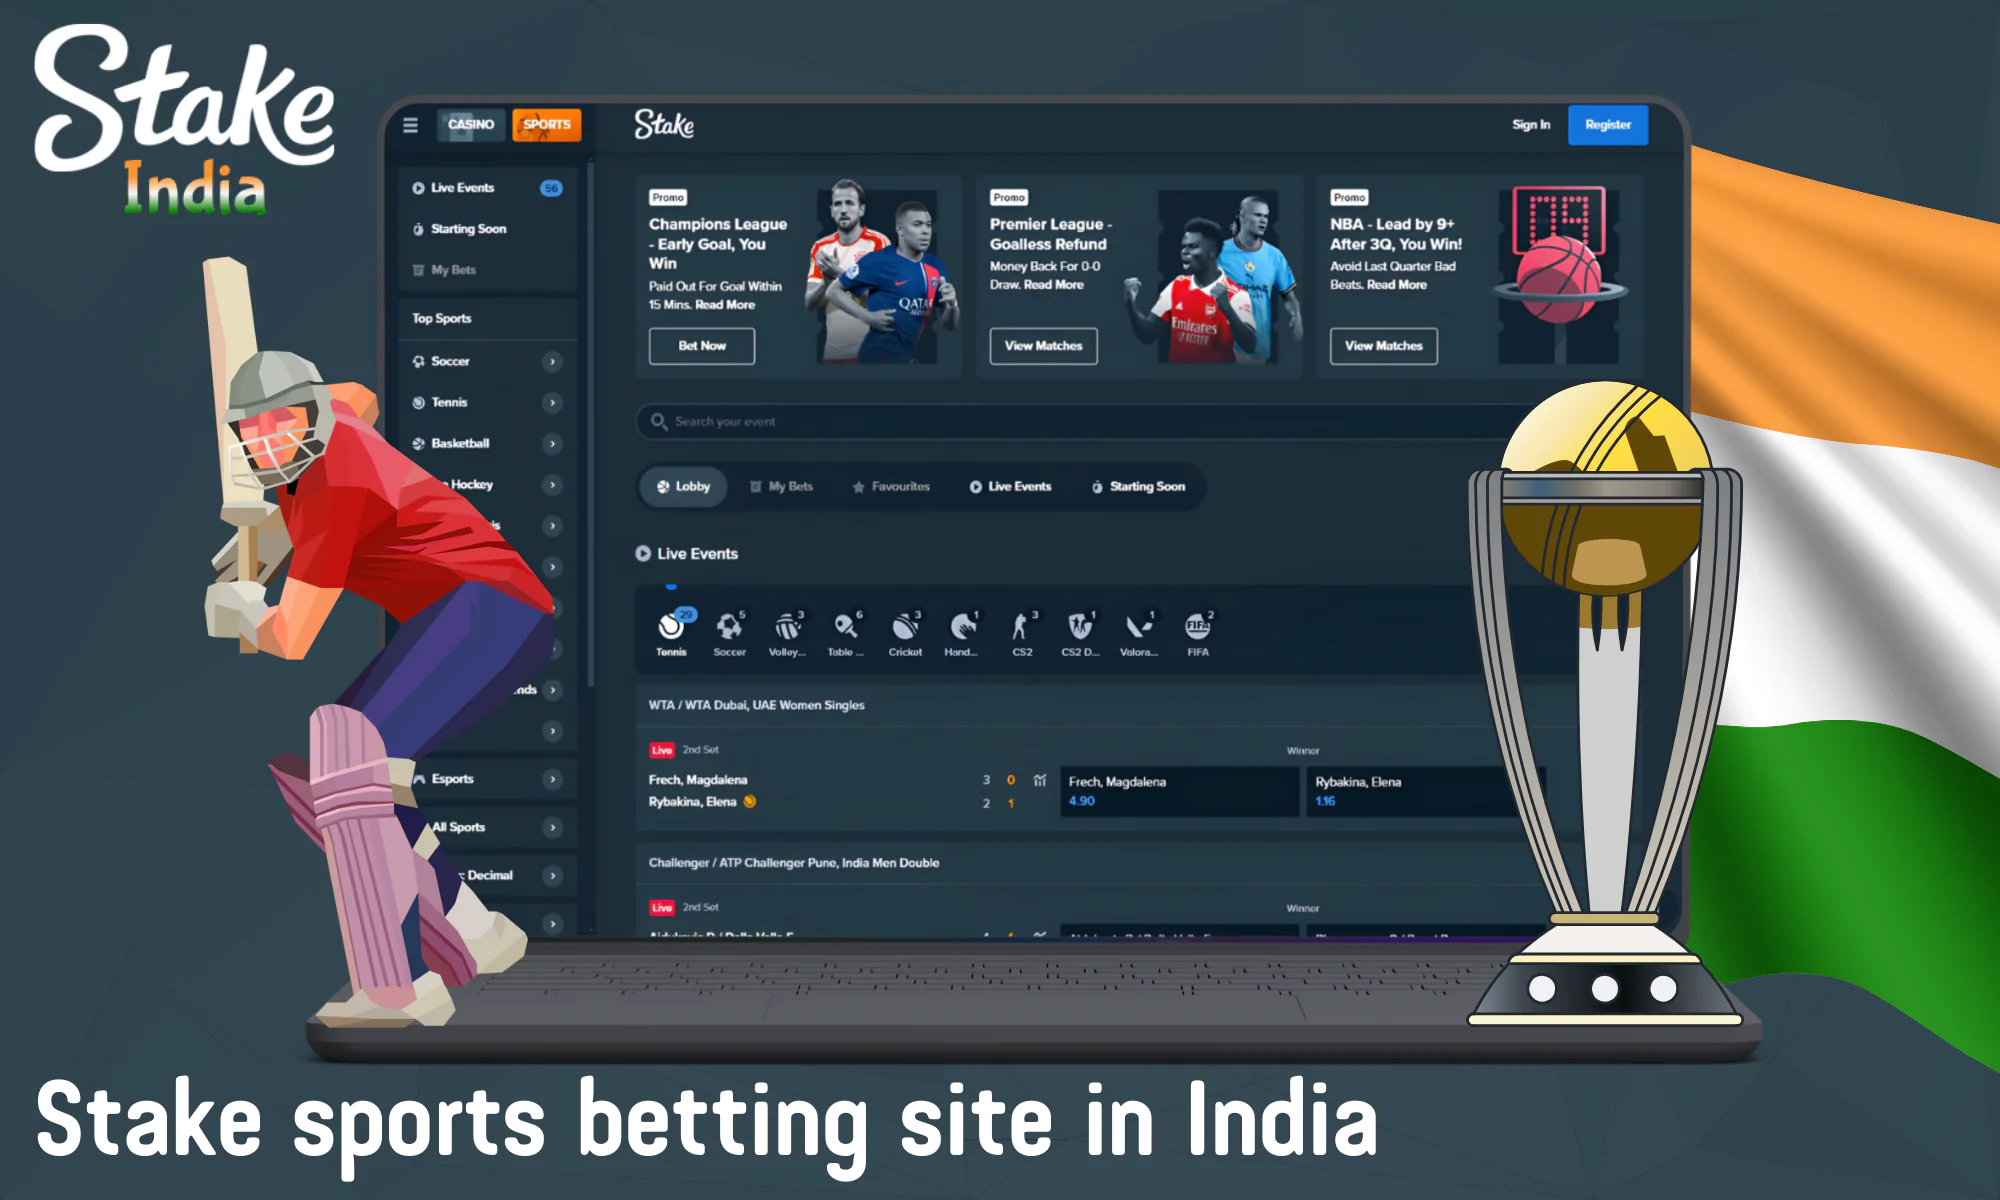 Stake bookmaker allows players from India to bet on more than 35 traditional sports